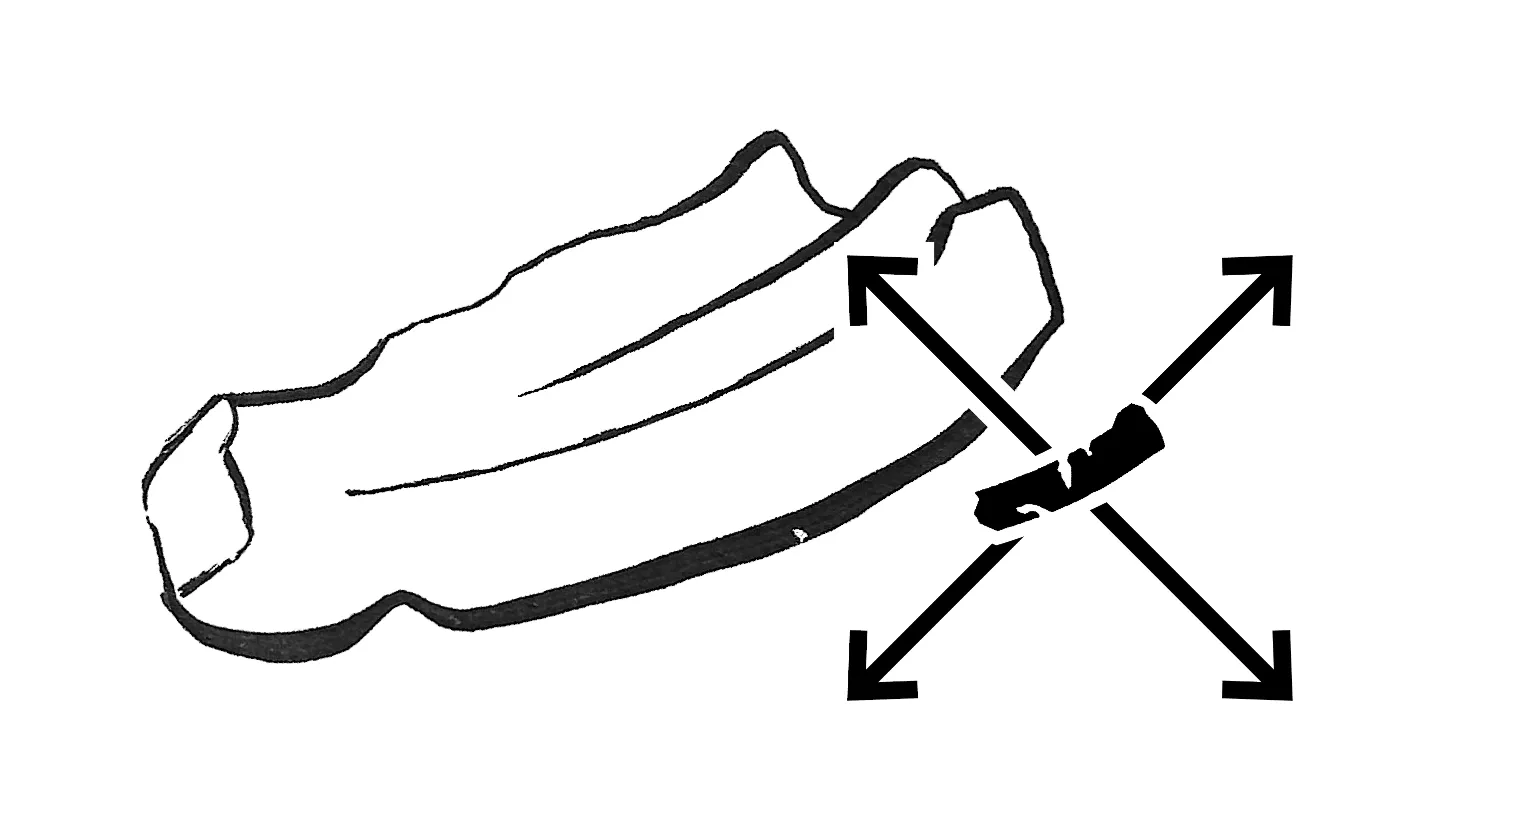 illustration: the Balance piece and simplified movement diagram